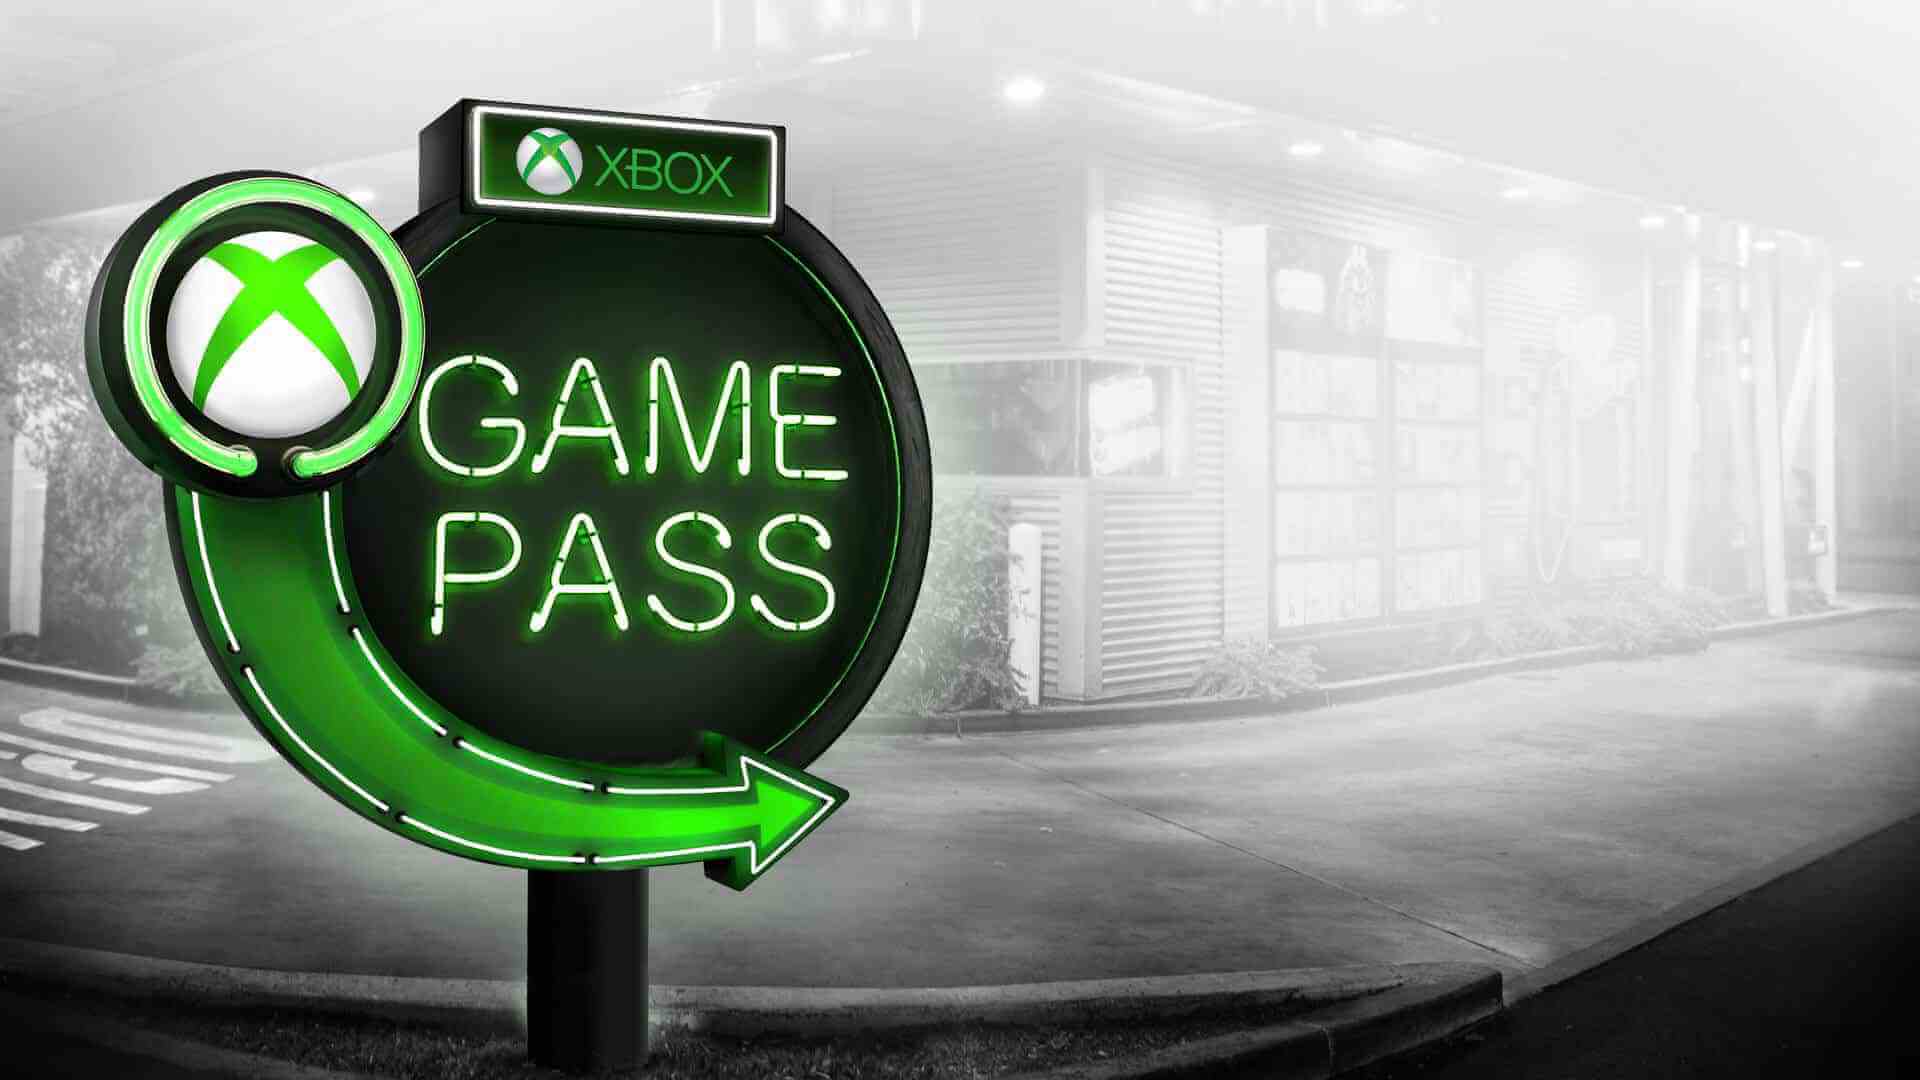 Modern Warfare 3 Arrives on Game Pass This Week image 1